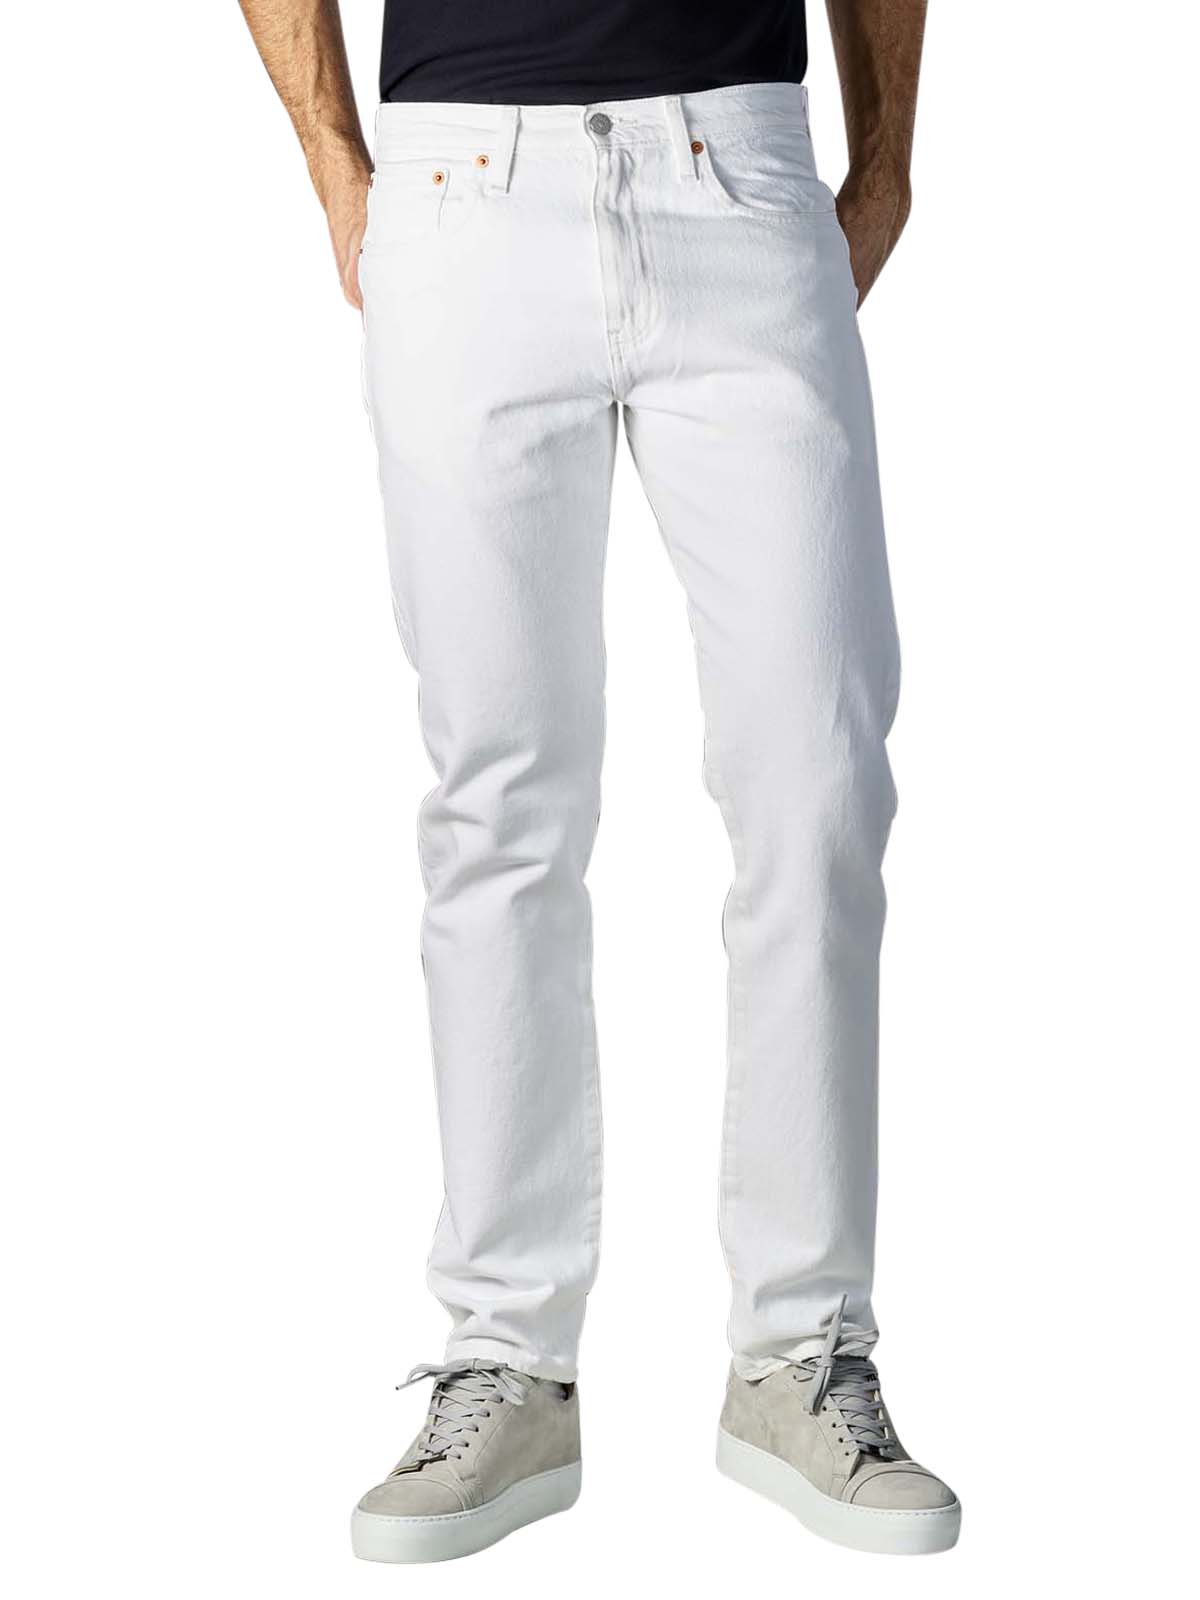 levis 502 white jeans Off 56% 